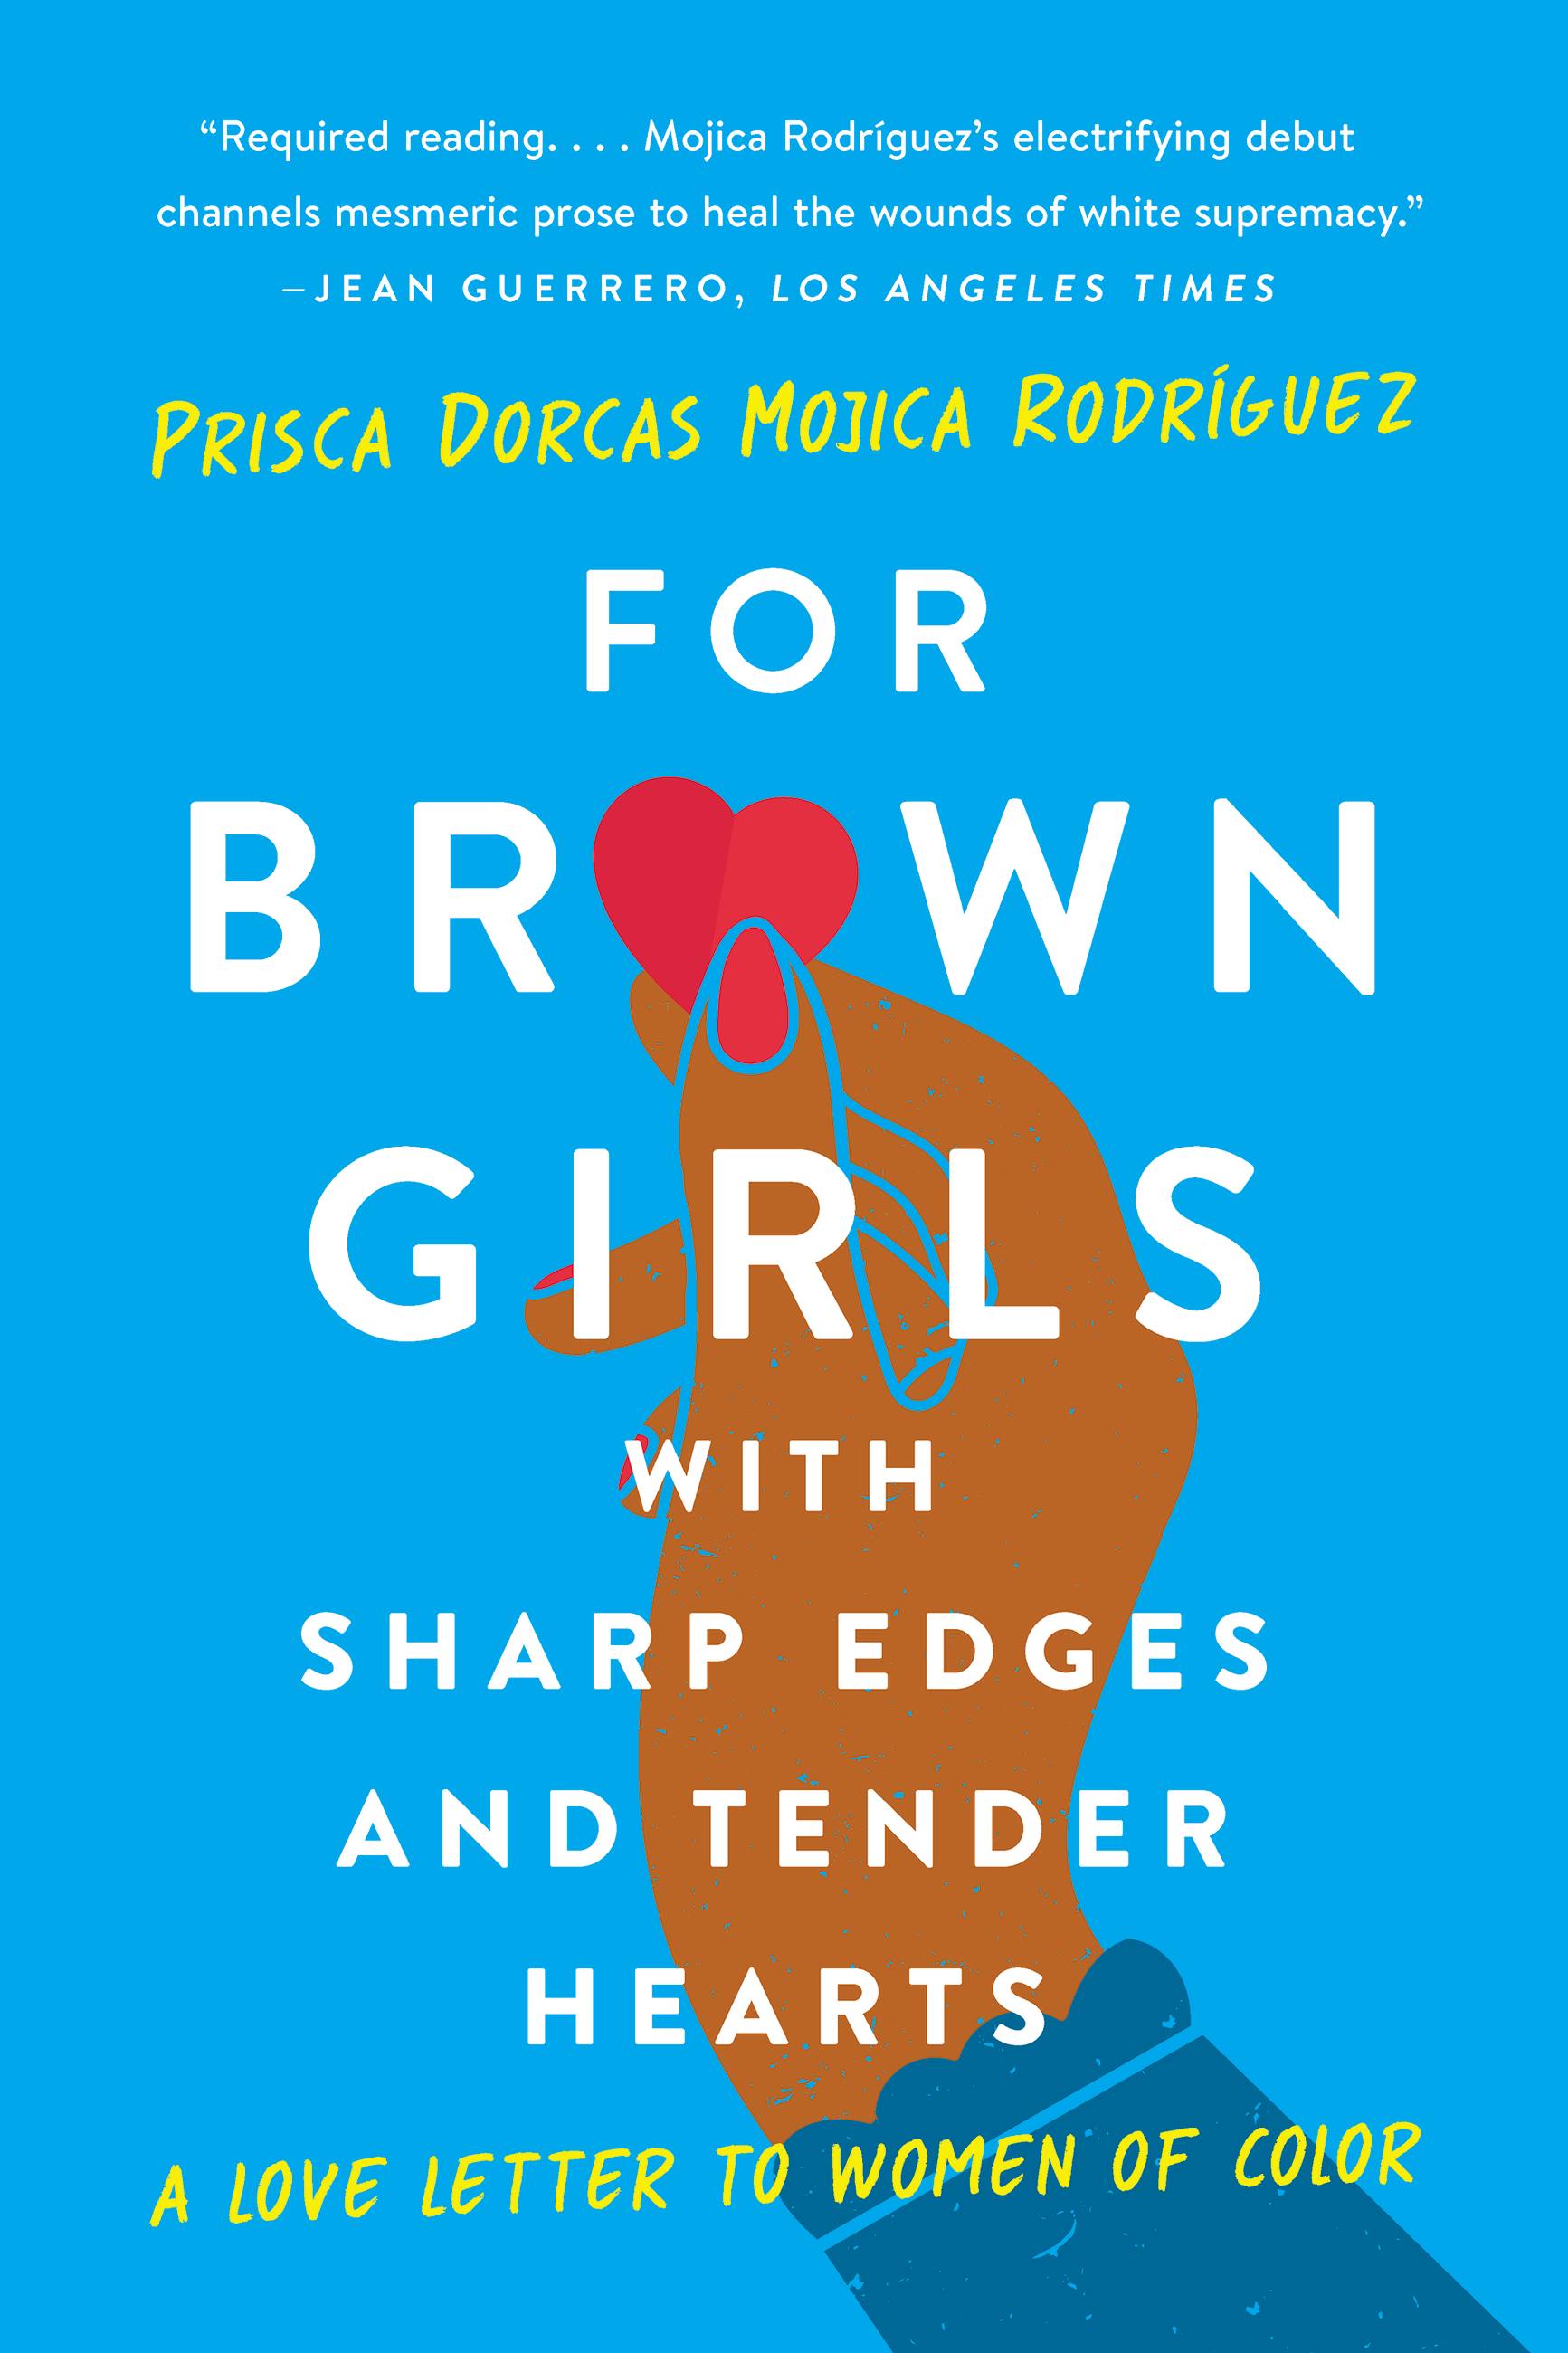 Hachette　and　Hearts　Prisca　with　Book　Group　Girls　Tender　Mojica　Brown　Dorcas　Edges　by　Sharp　For　Rodriguez